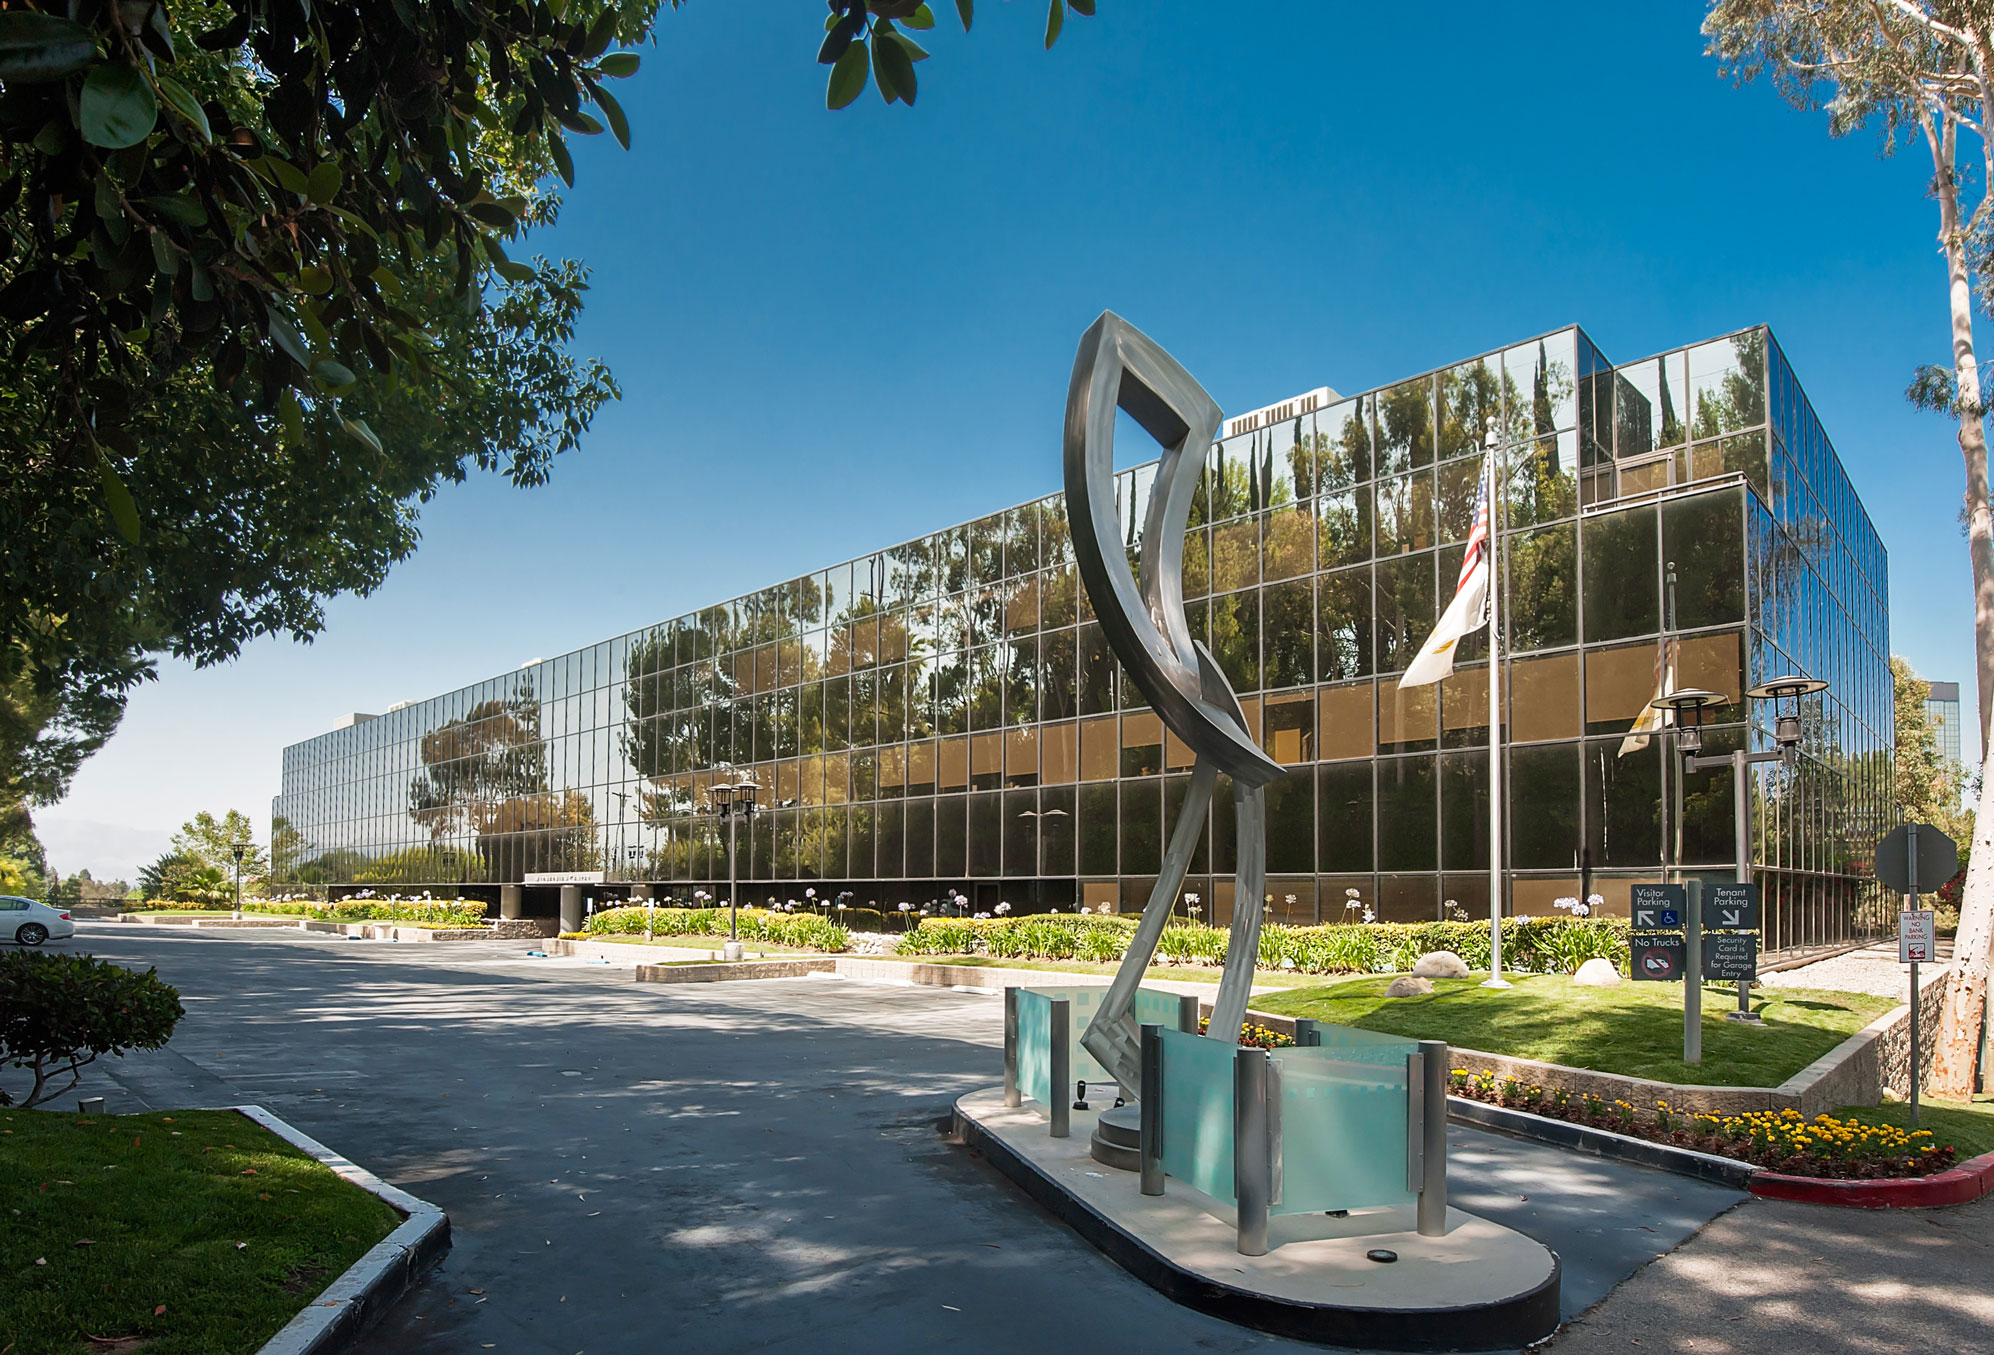 Younan Properties sells Warnerview Corporate Center in Woodland Hills and generates profits for investors twice with the same asset. It owned and sold the asset in 2004, and acquired it again in 2009. The latest sale generated a 20% annual return to investors.